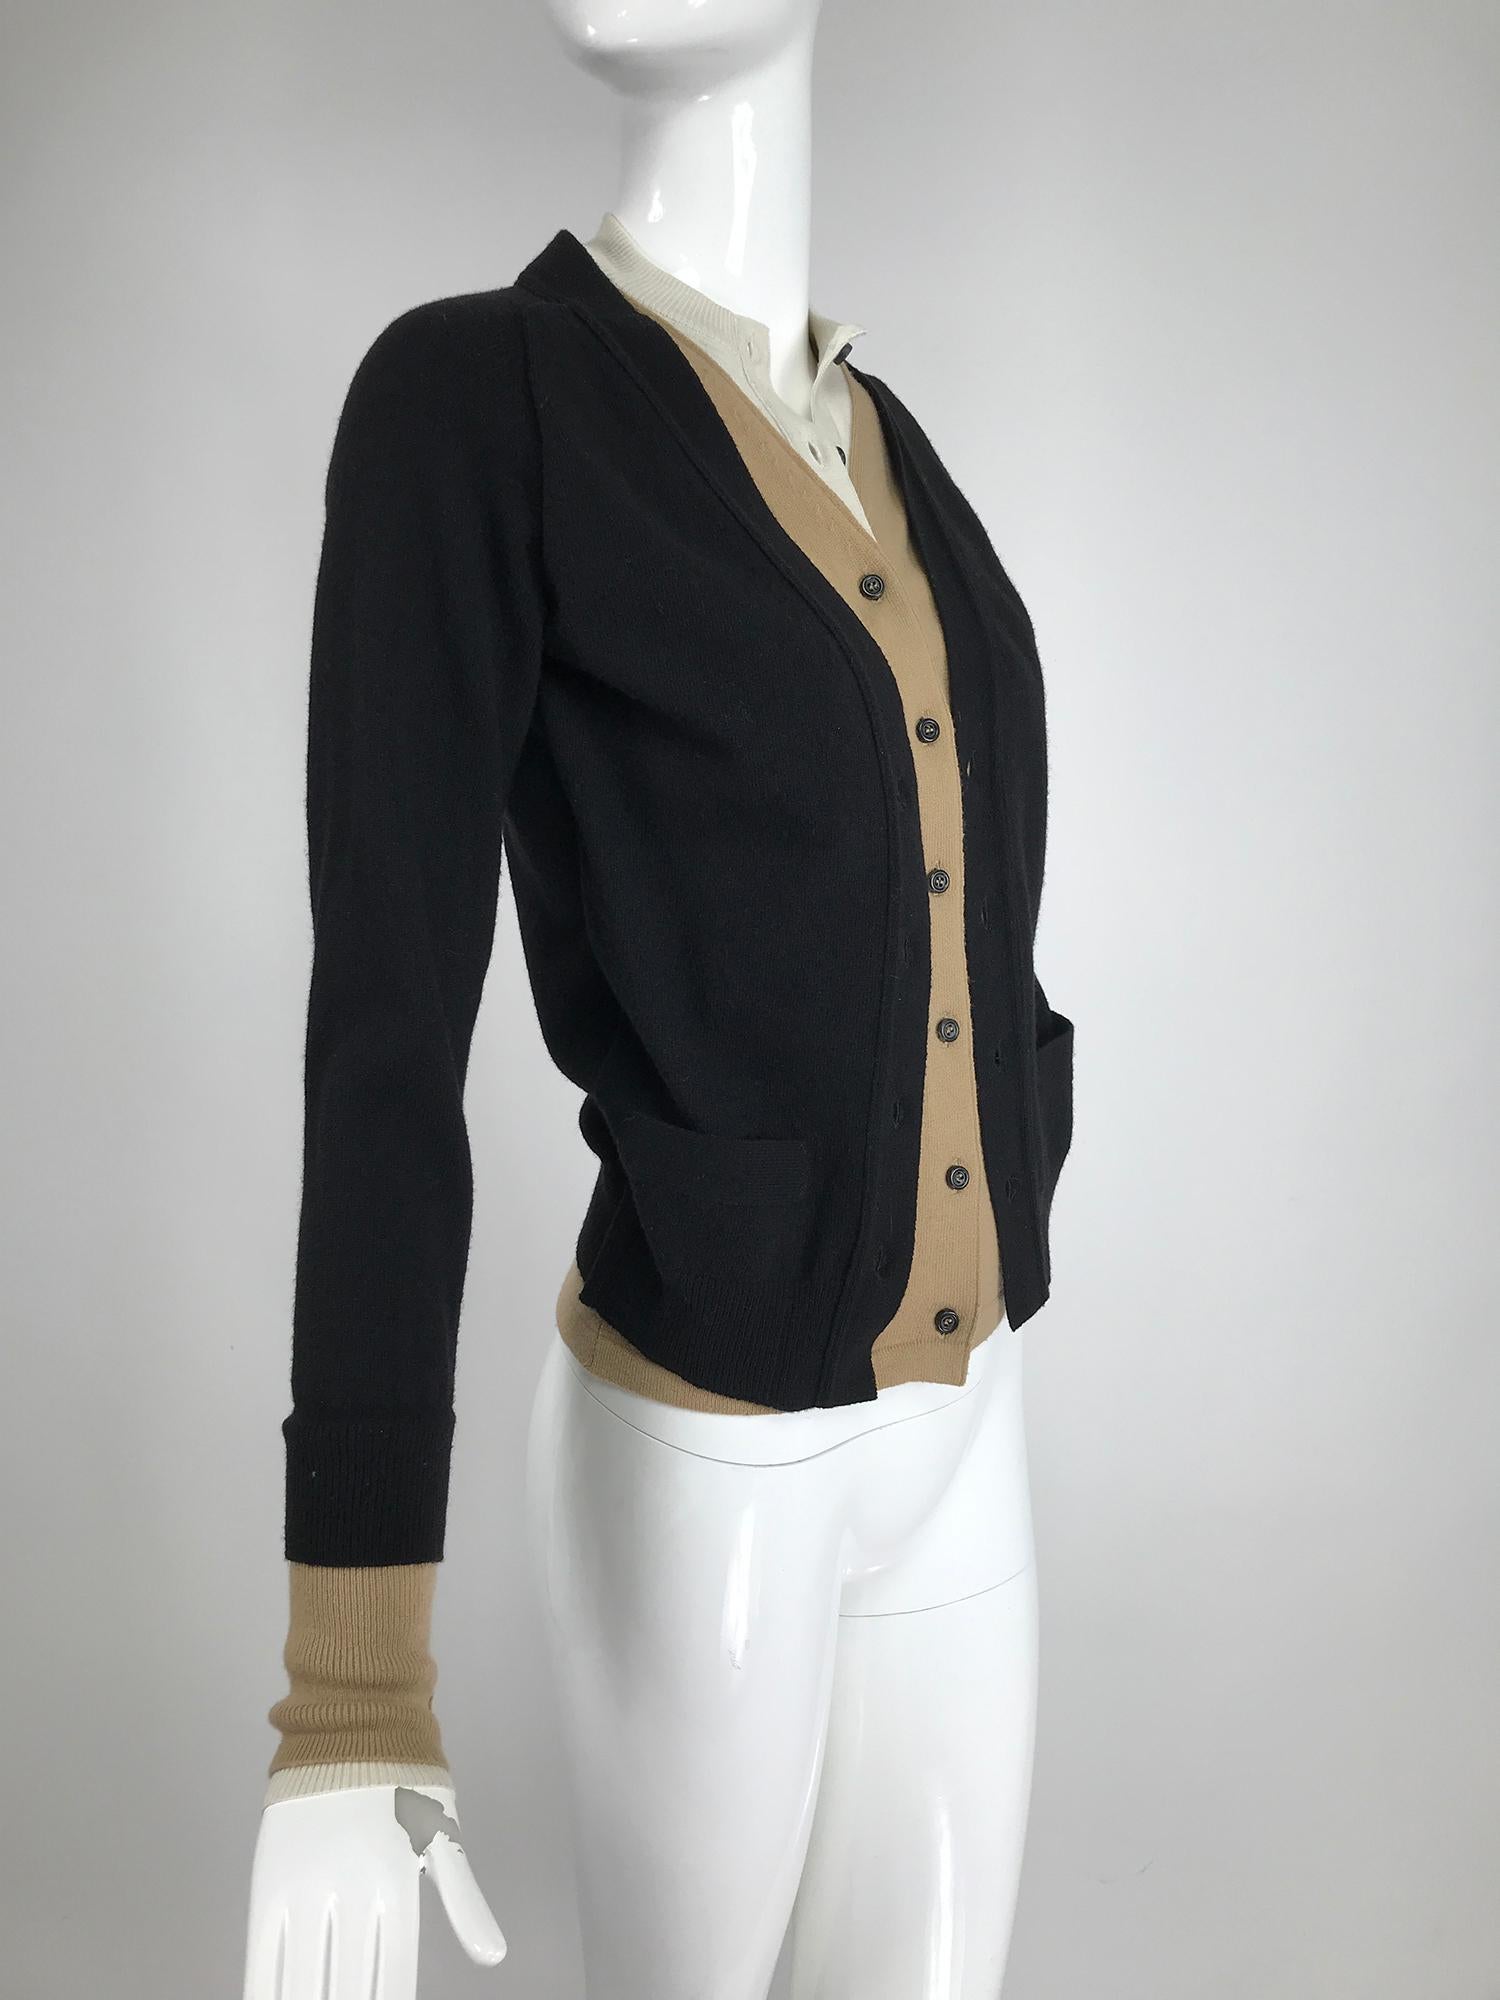 Yves Saint Laurent three in one cropped cardigan sweater. The outer sweater is black, with a v neck front, long sleeves and small front pockets. Ribbed hem and cuffs. The tan layer is only a facing that is stitched to the black sweater, it features